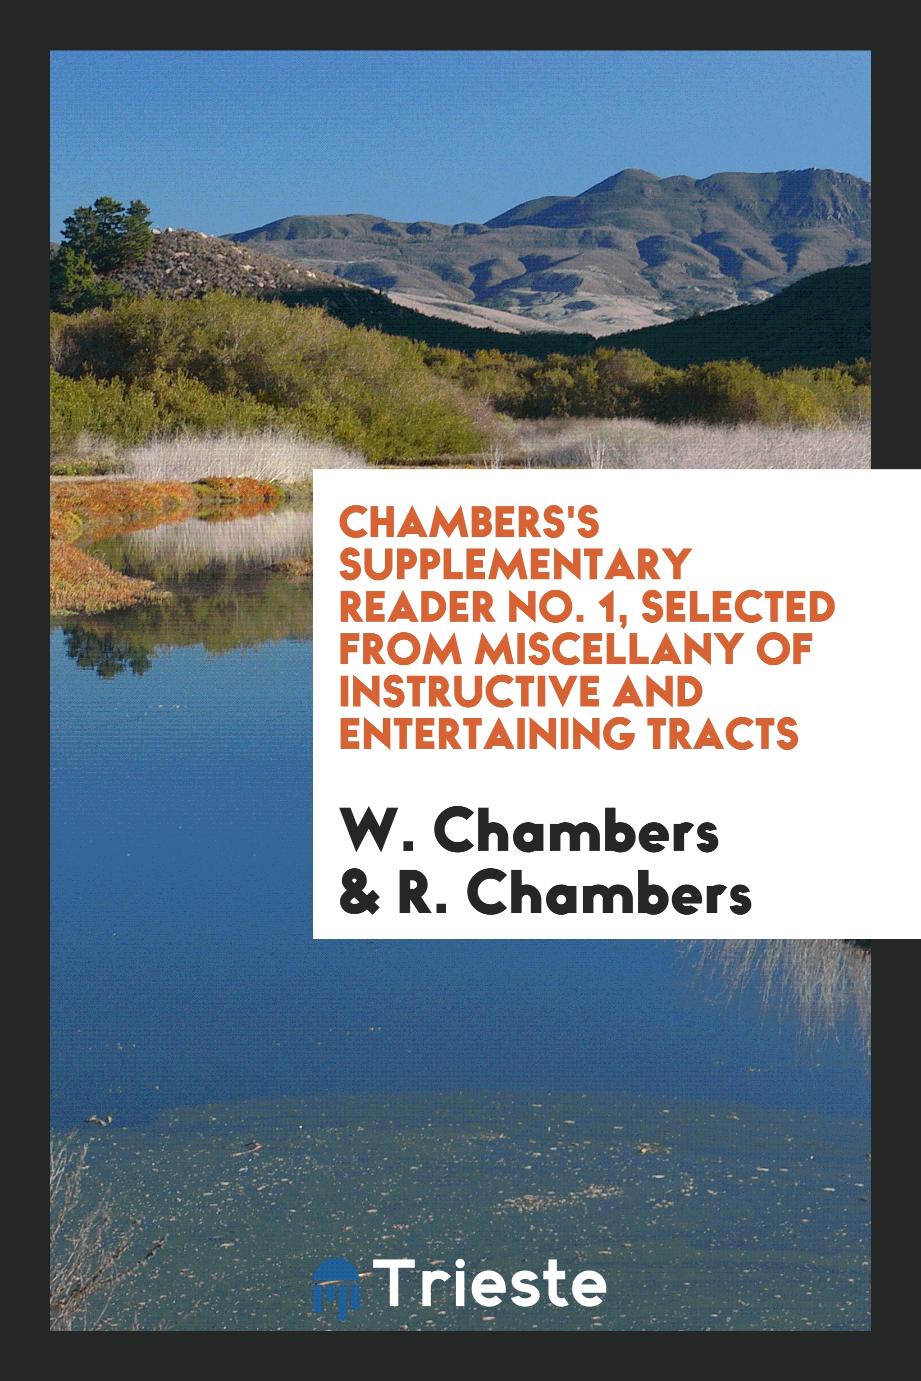 Chambers's Supplementary Reader No. 1, Selected from Miscellany of Instructive and Entertaining Tracts